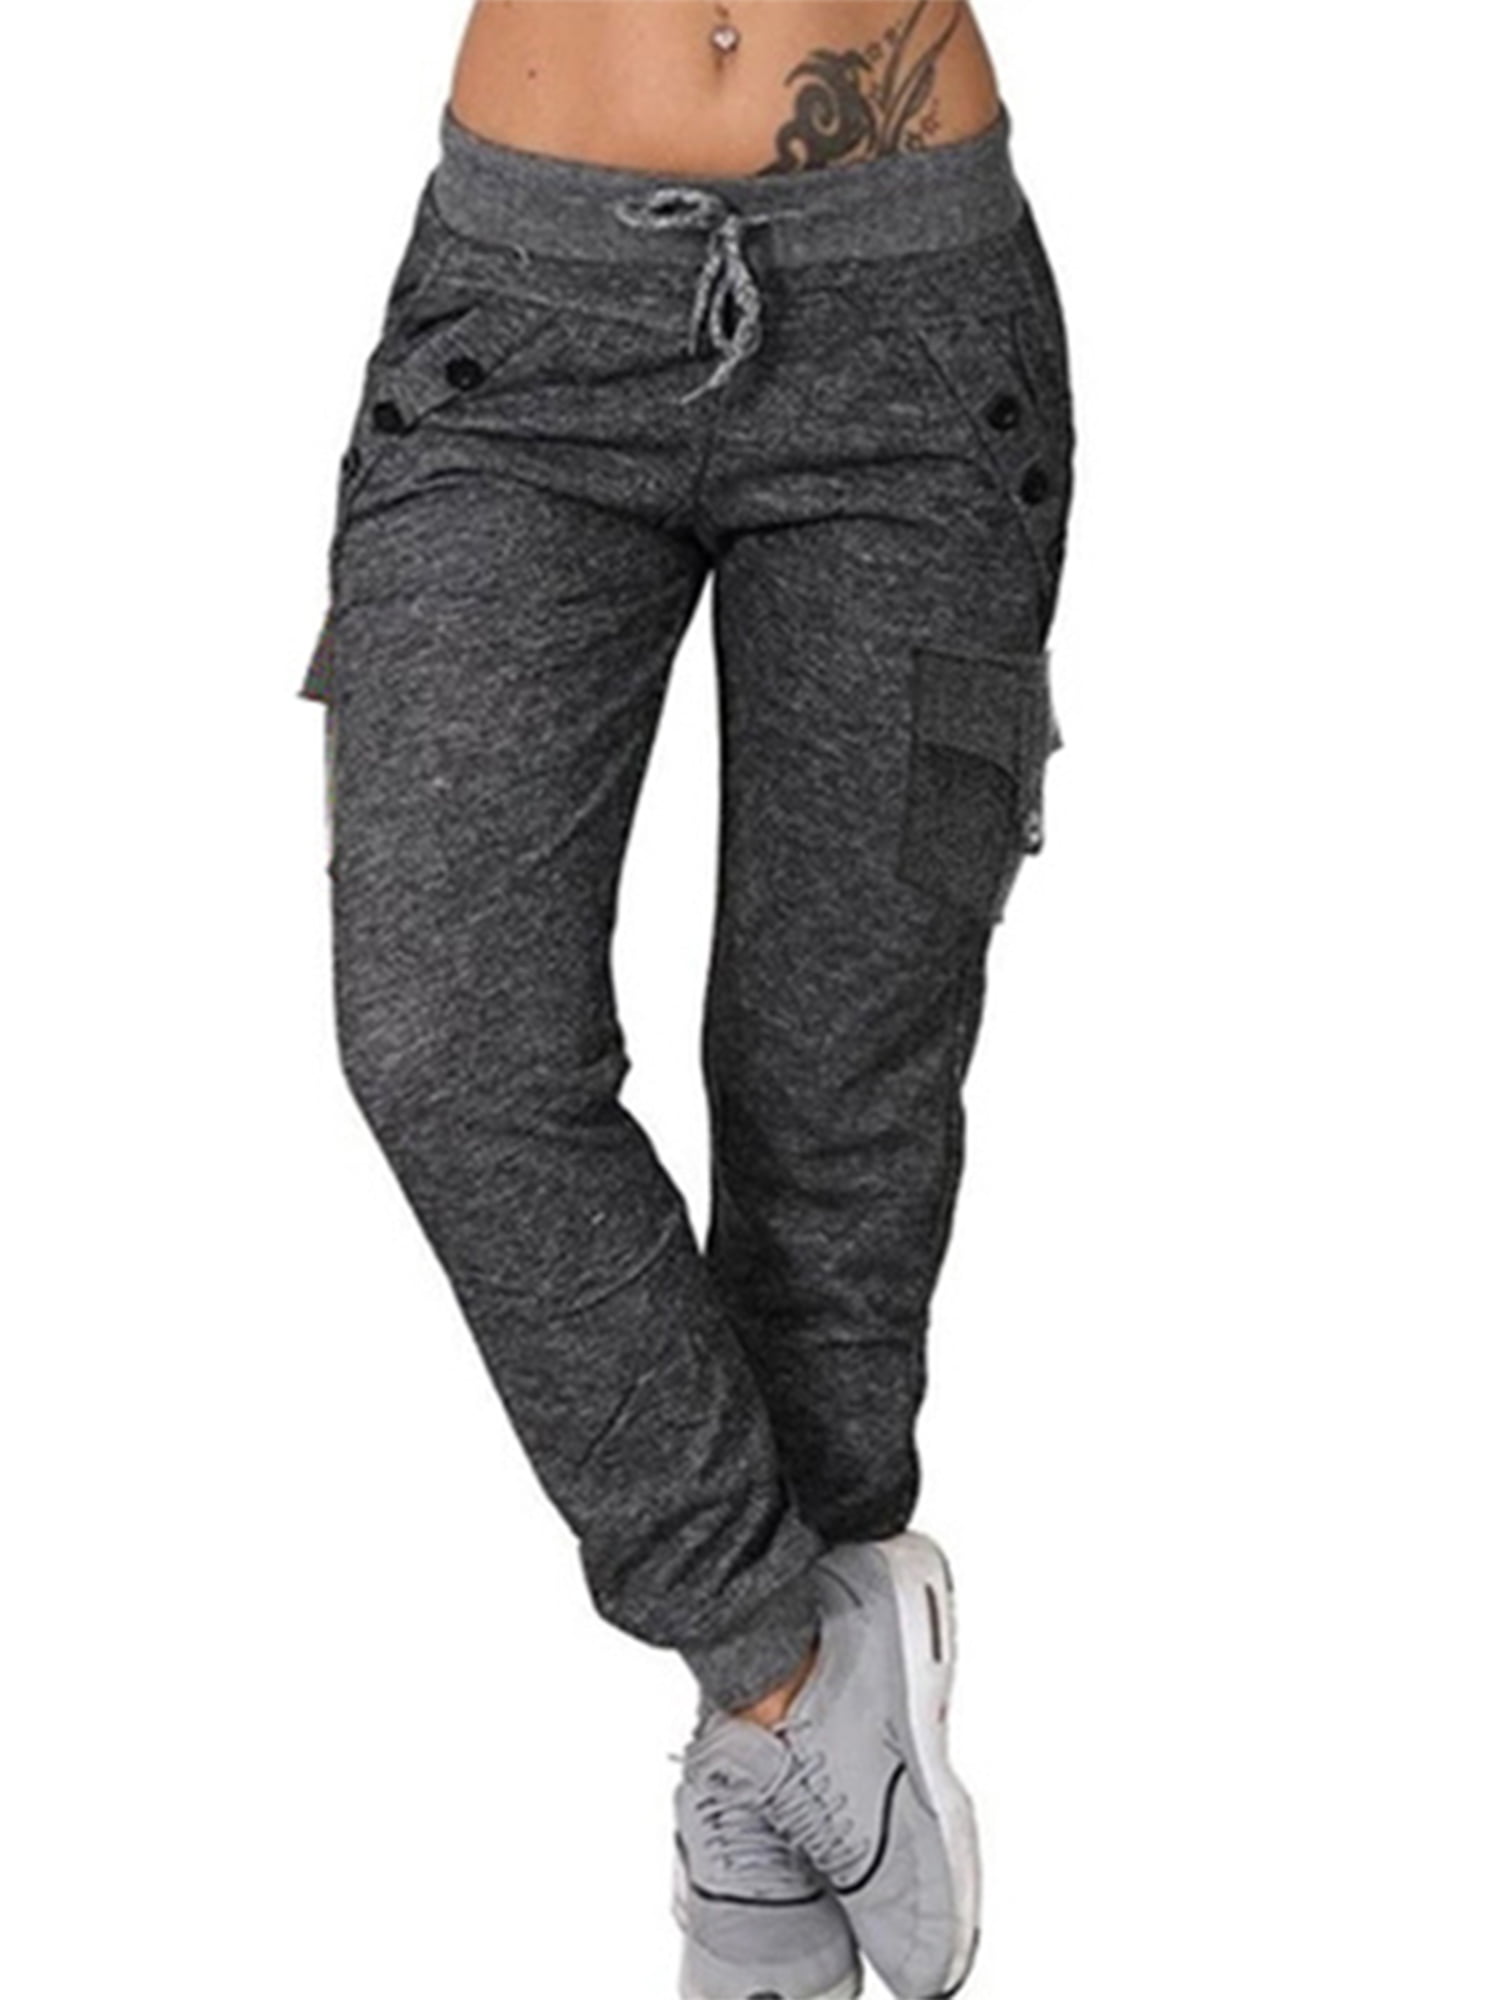 N\C Women's Joggers Sweatpants Casual Pants Jogging Sports Trousers Tracksuit Bottoms Lounge Pants Drawstring Waist with Pockets